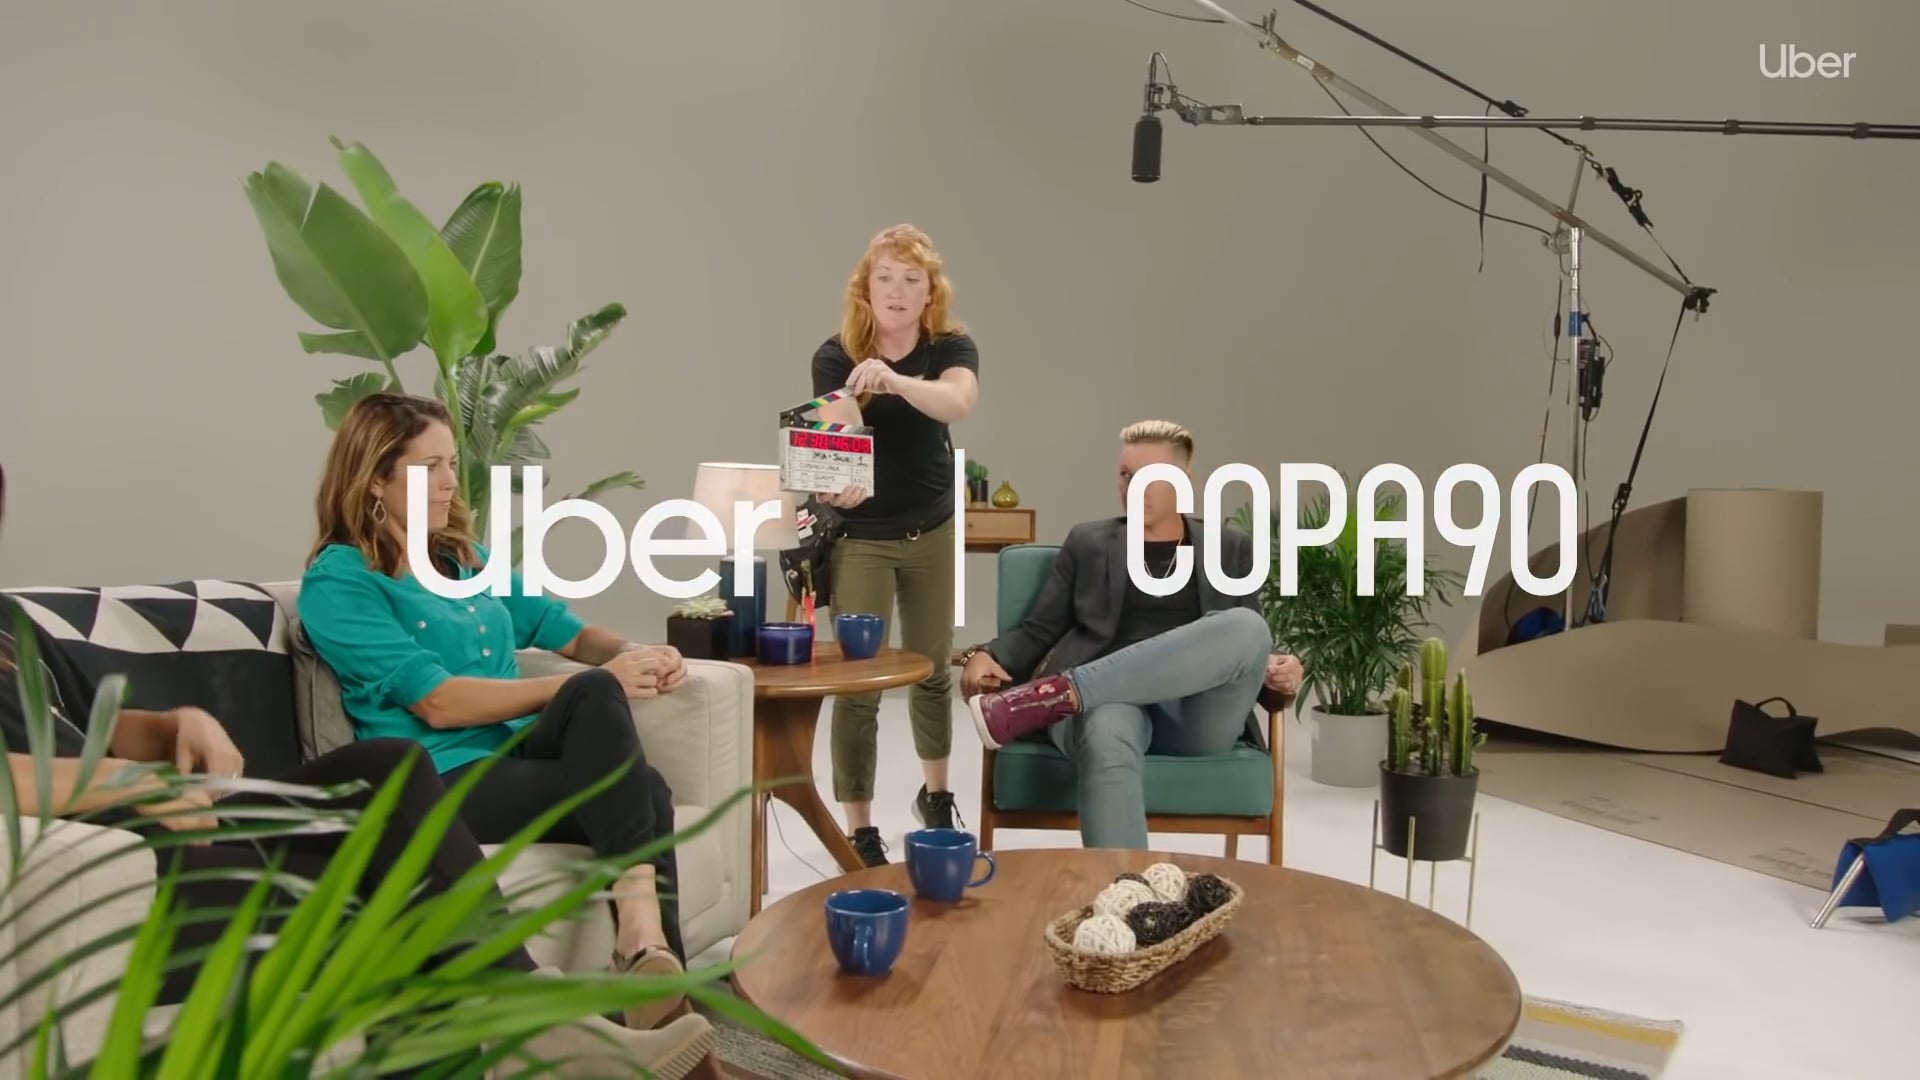 Uber-Copa90-LightSpace Studios LA - soccer_is_not_fair_we_are_the_wolfpack_ep_1_ft_abby_wambach_A1cVyox_d9c_1080p